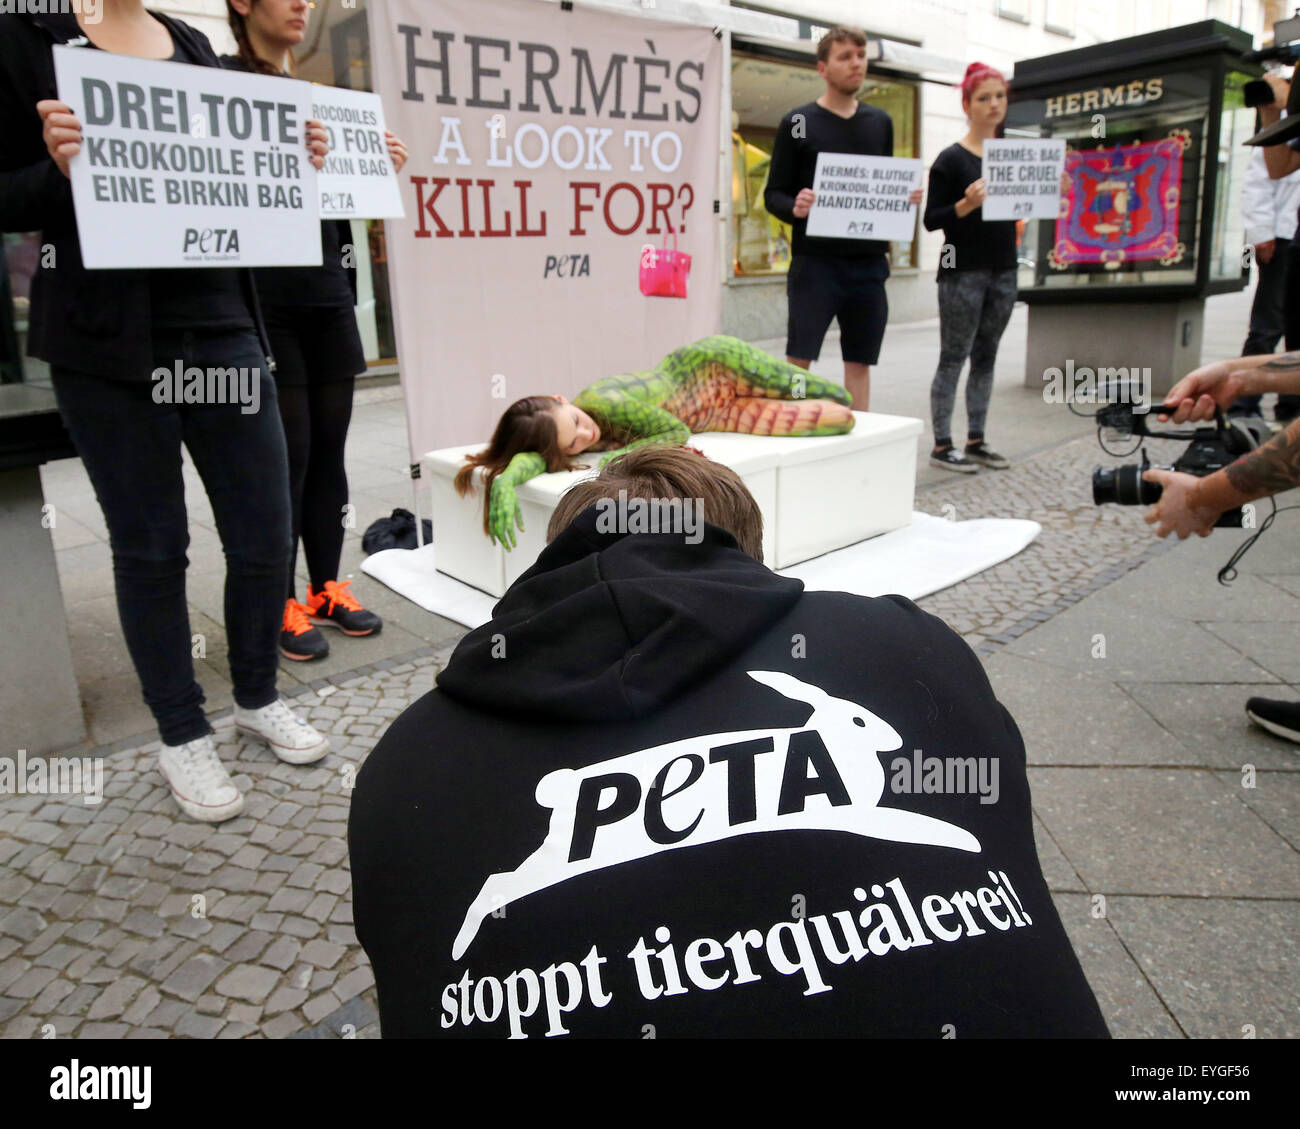 Berlin, Germany. 29th July, 2015. Members of the animal rights group Peta protest in front of a shop of the brand Hermes against the killing of crocodiles for luxury leather bags in Berlin, Germany, 29 July 2015. A model, painted with artificial crocodile skin, lies in a fake pool of blood on the Kurfuerstendamm in Berlin. Credit:  dpa picture alliance/Alamy Live News Stock Photo